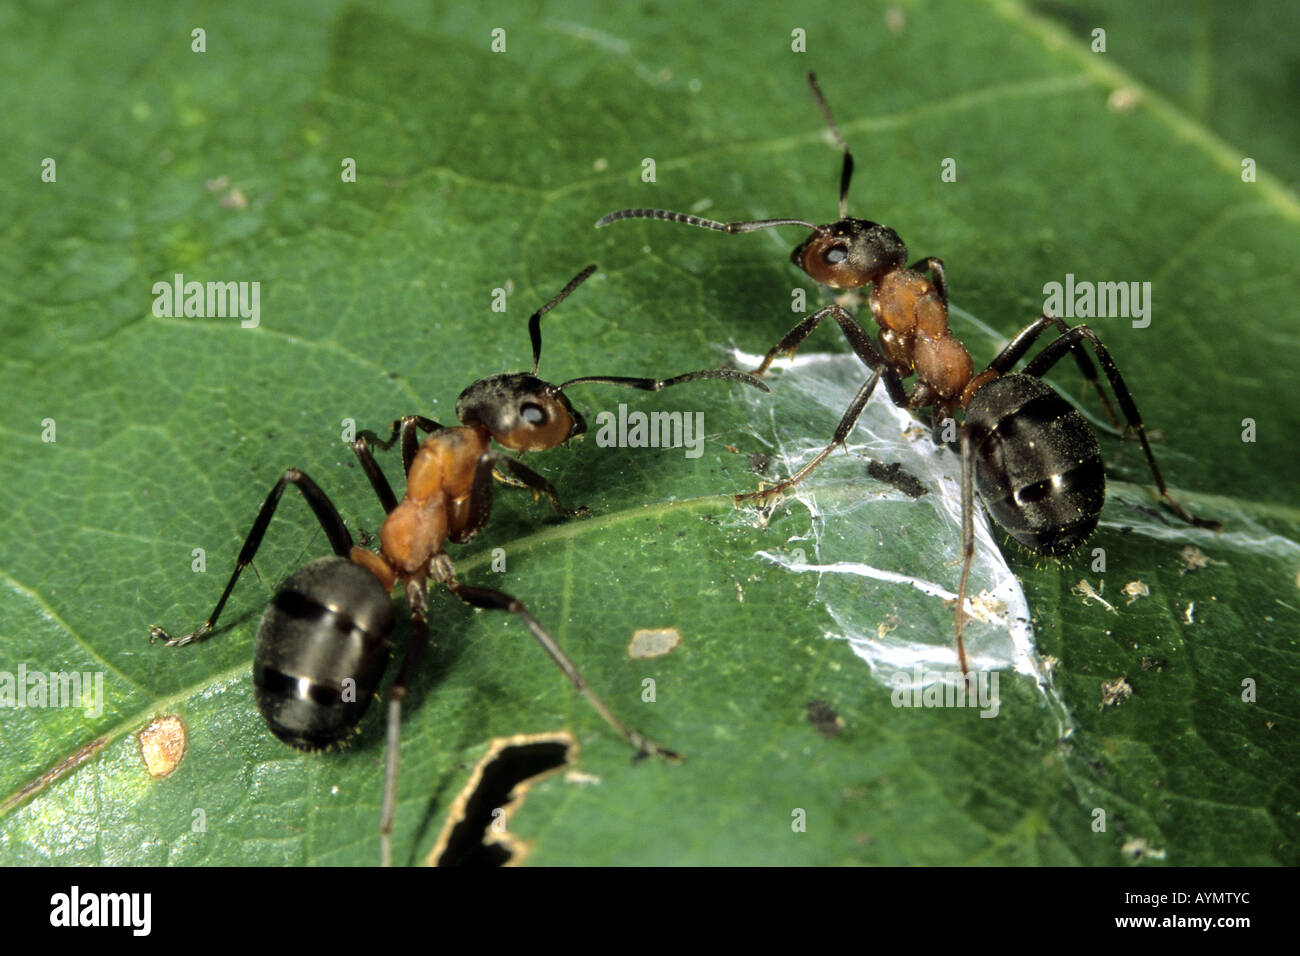 Small Red Wood Ant (Formica polyctena), two workers on leaf Stock Photo